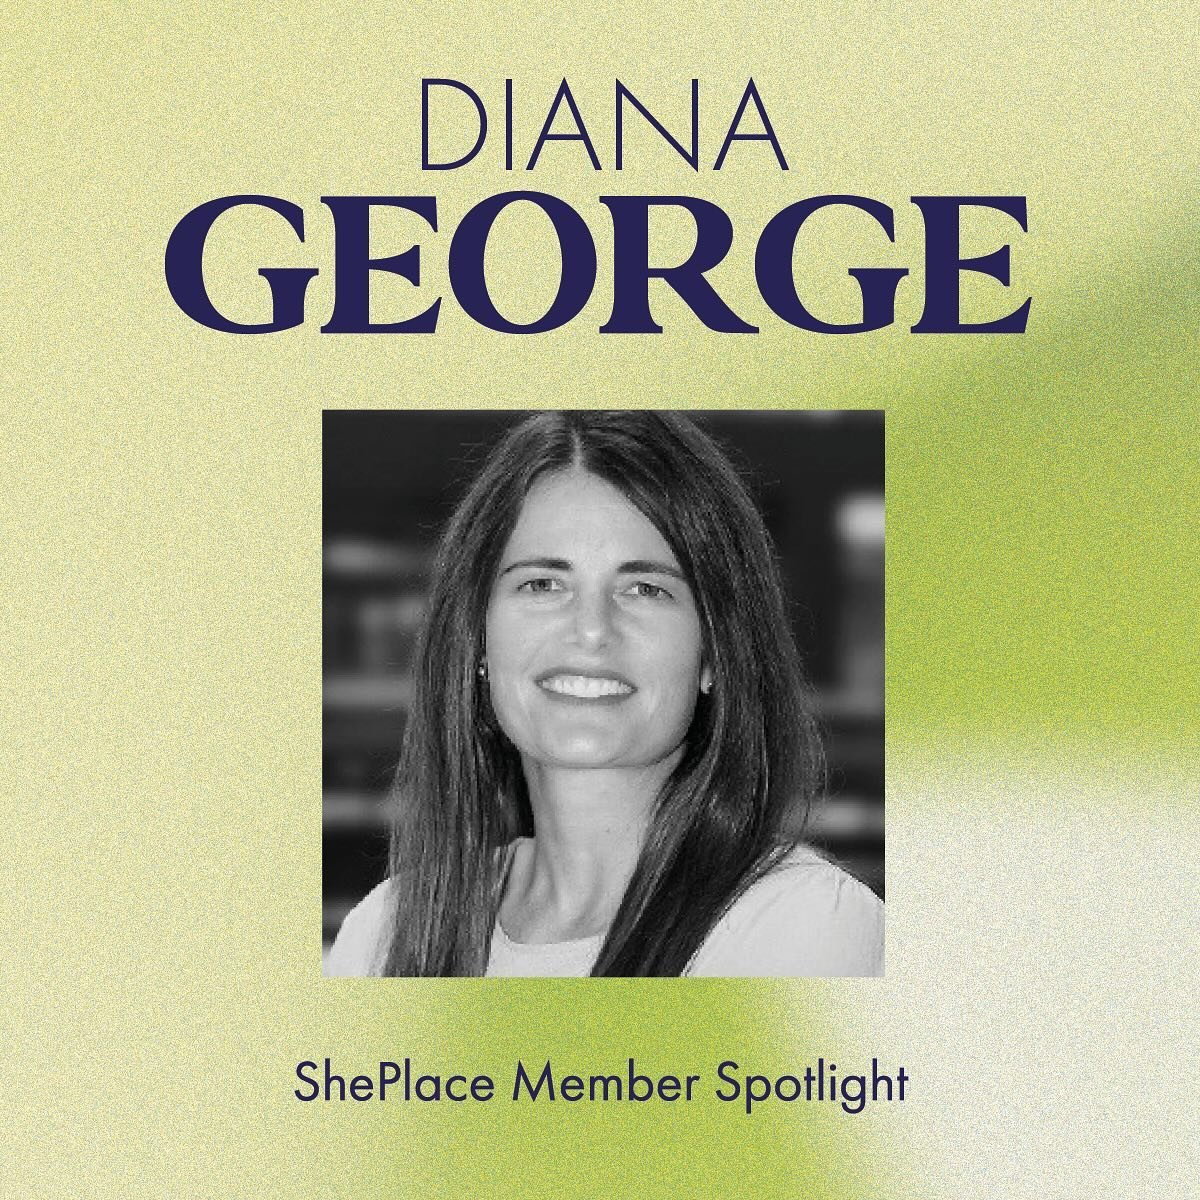 Diana George is a Senior Vice President and Regional Director of Key&rsquo;s Family Wealth Consulting and Business Advisory Services. As a young girl, Diana learned the importance of financial literacy and has gained multiple degrees which has enhanc